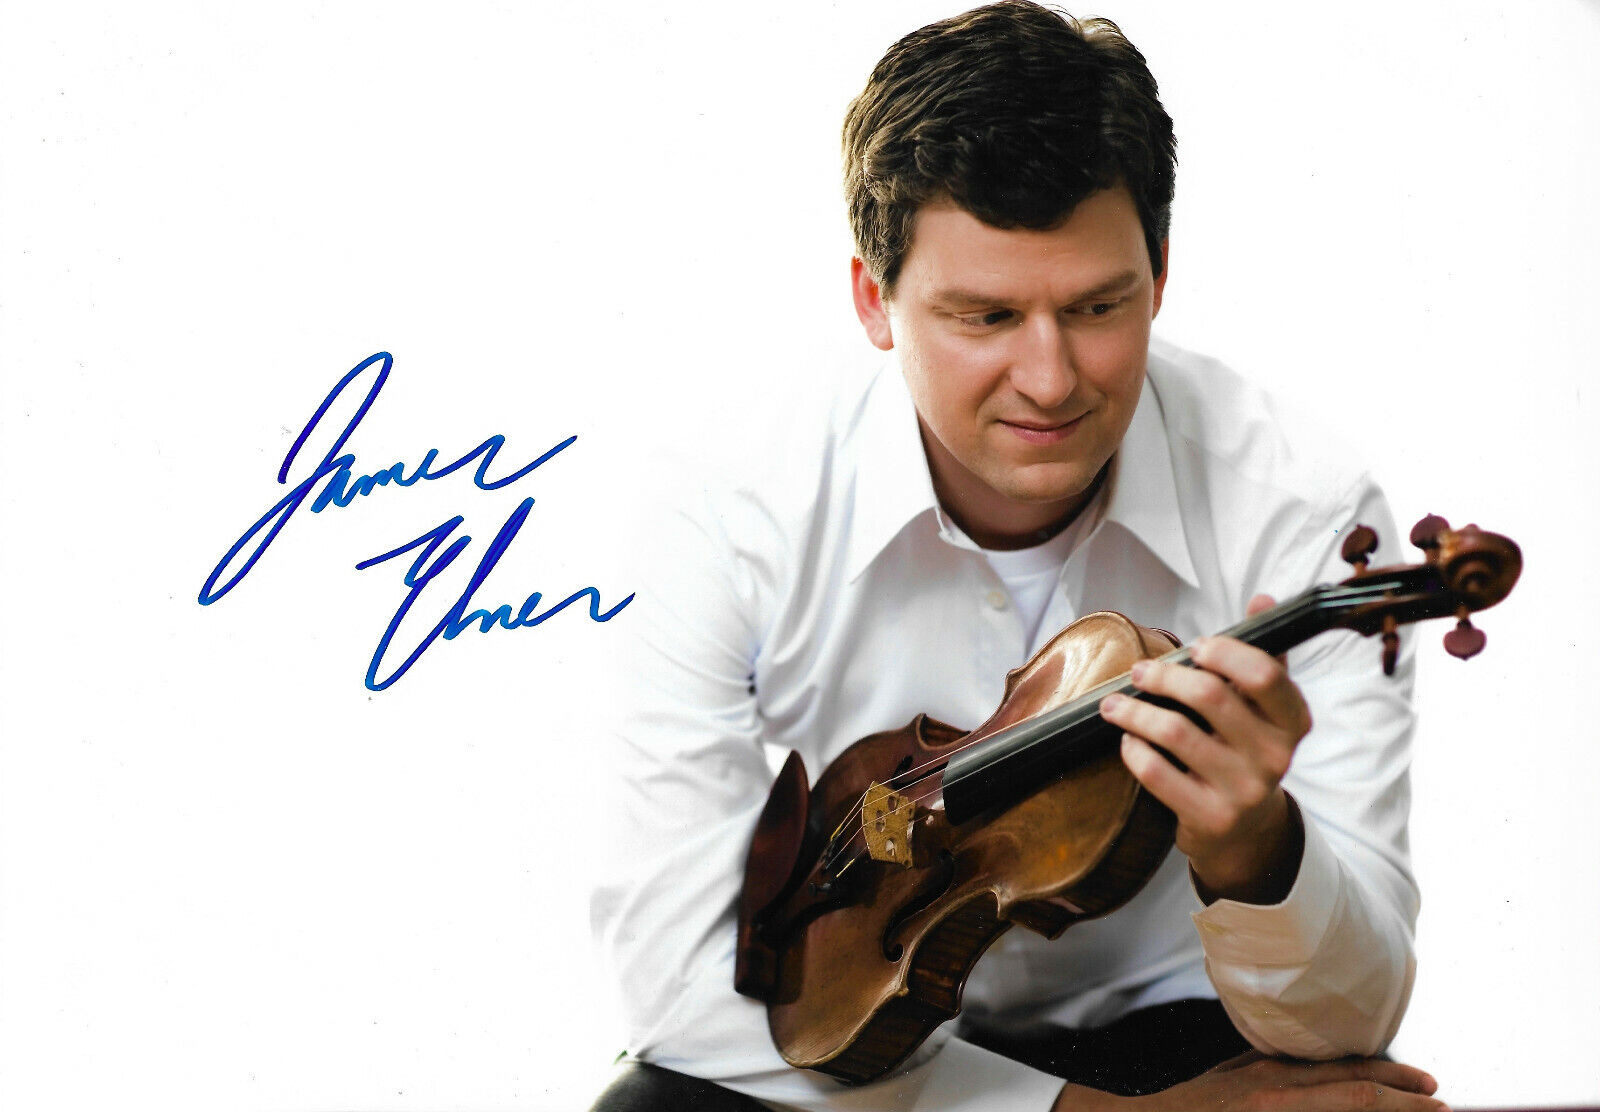 James Ehnes Violine signed 8x12 inch Photo Poster painting autograph